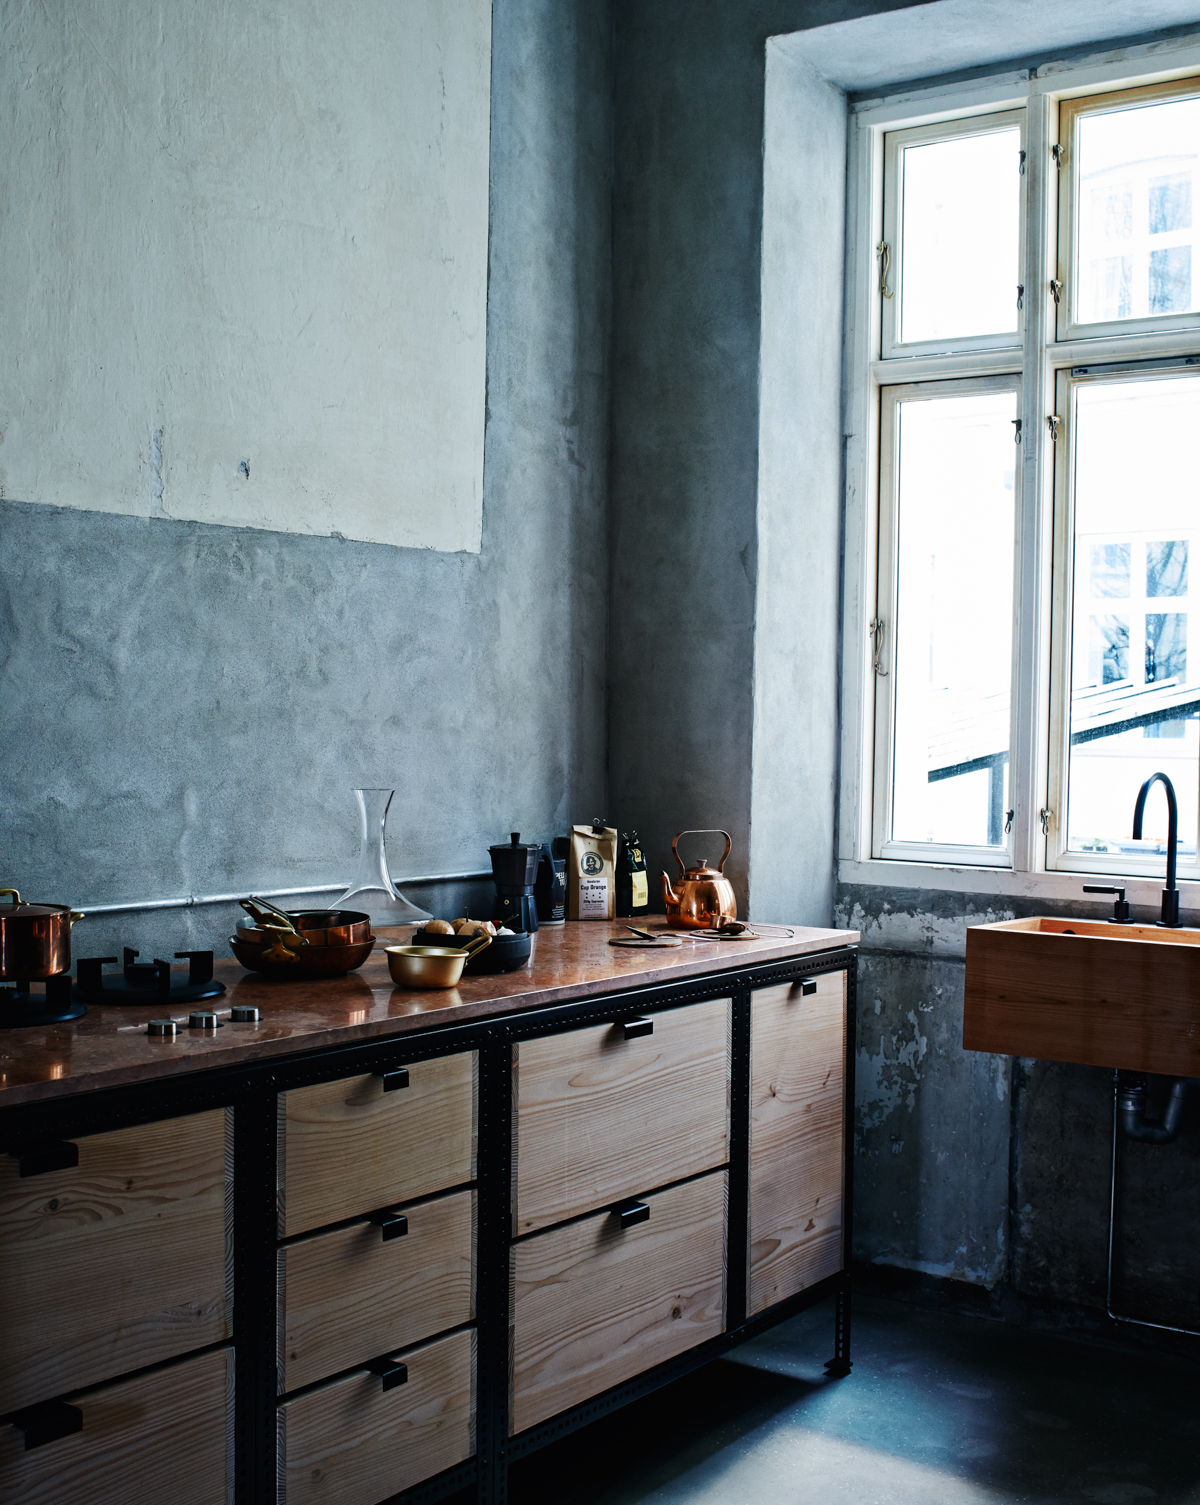 Is it Time to Downsize the Kitchen? on apartment 34